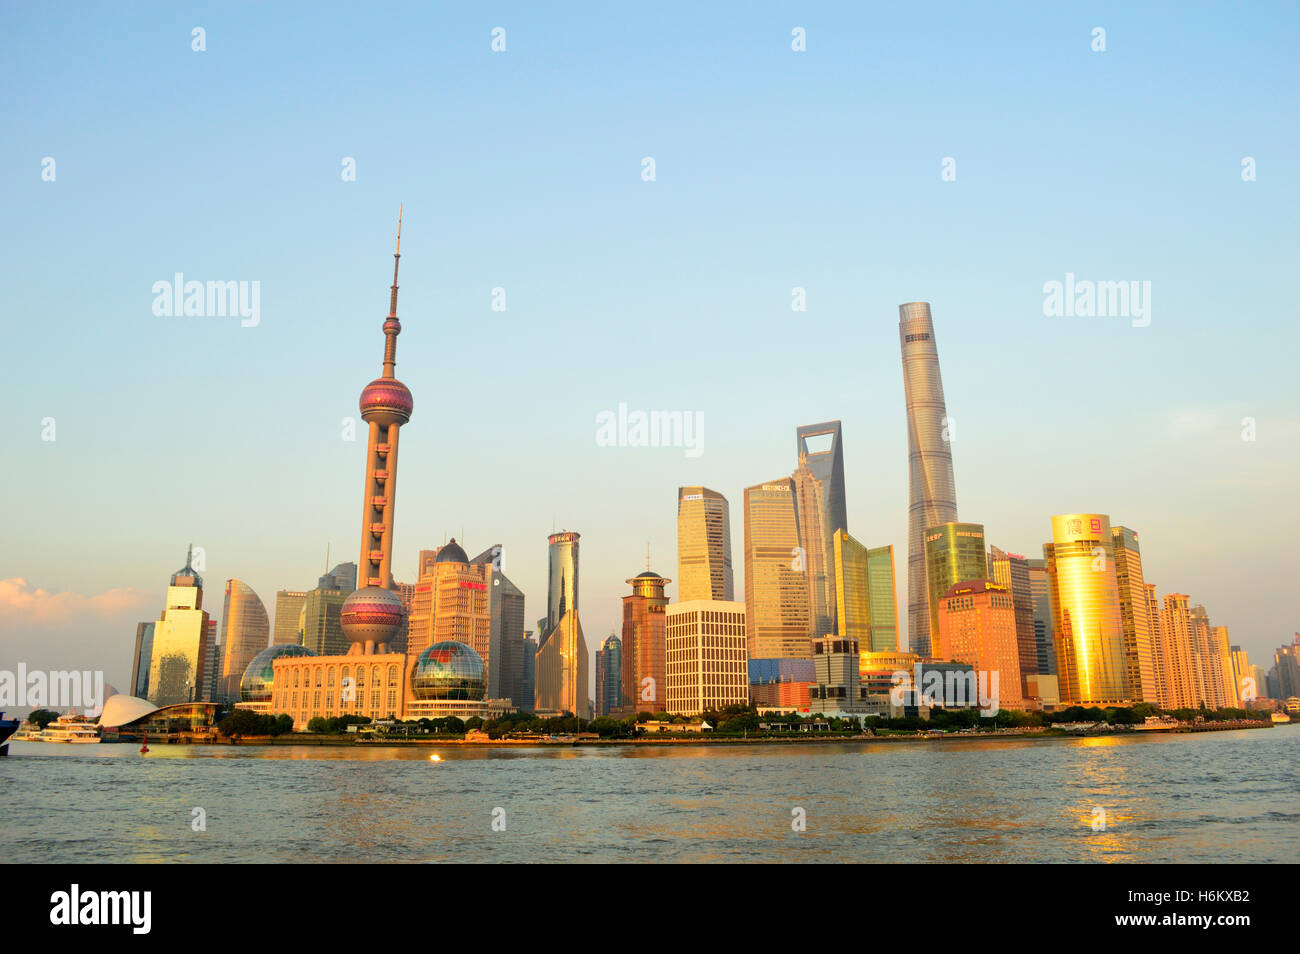 Shanghai, China, 2015. Shanghai Pudong district skyline during the sunset viewed from the Bund. Stock Photo